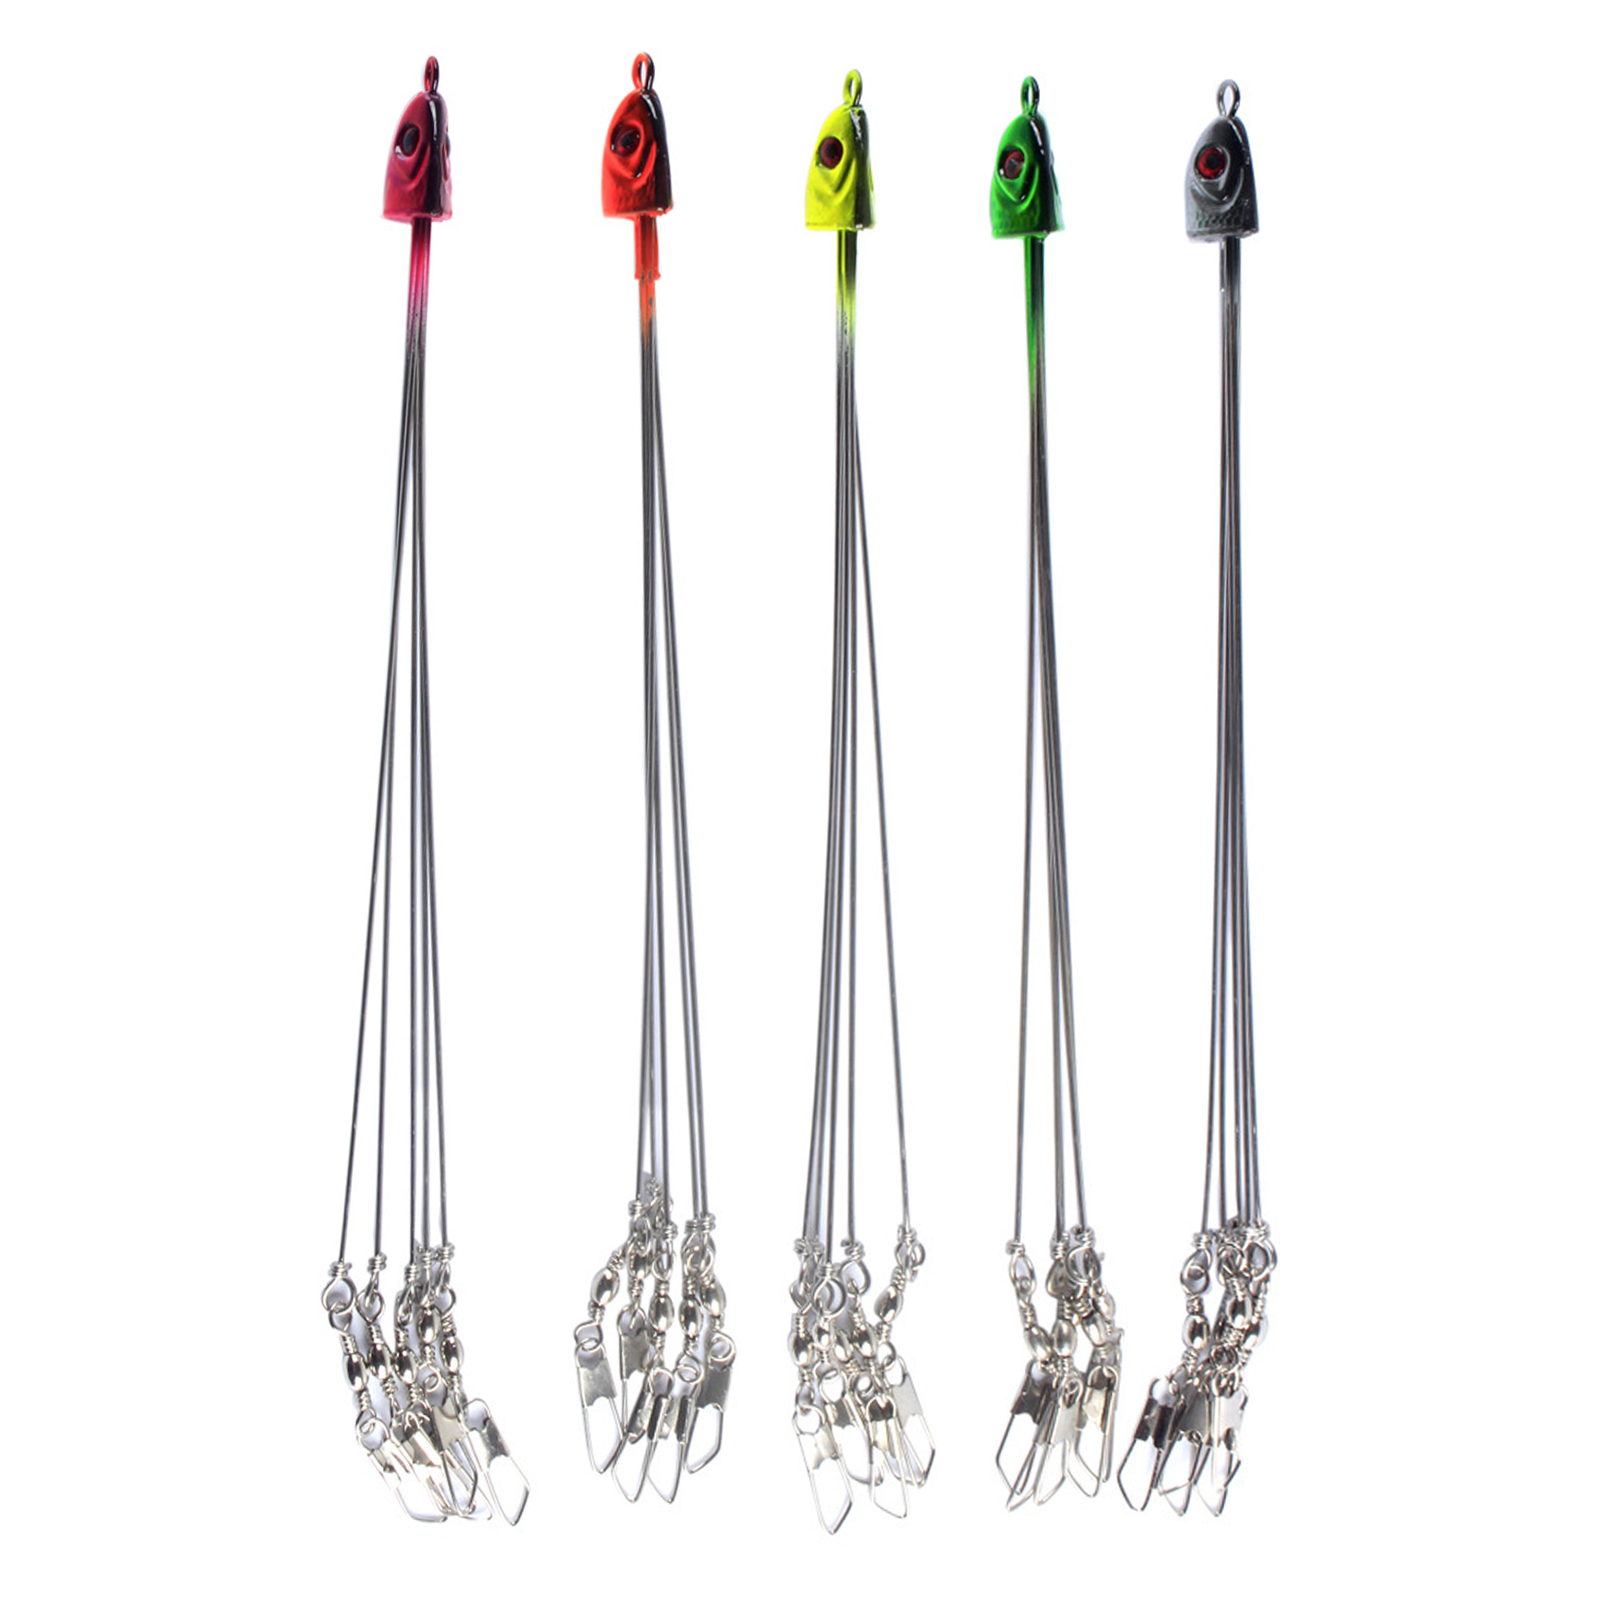 FREE FISHER 5pcs Fishing Alabama Rigs 5-Arms Umbrella 20.7g 21cm Artificial Lures Steel Wire Snap Swivel Spinners Swimbaits Fishing Group Baits